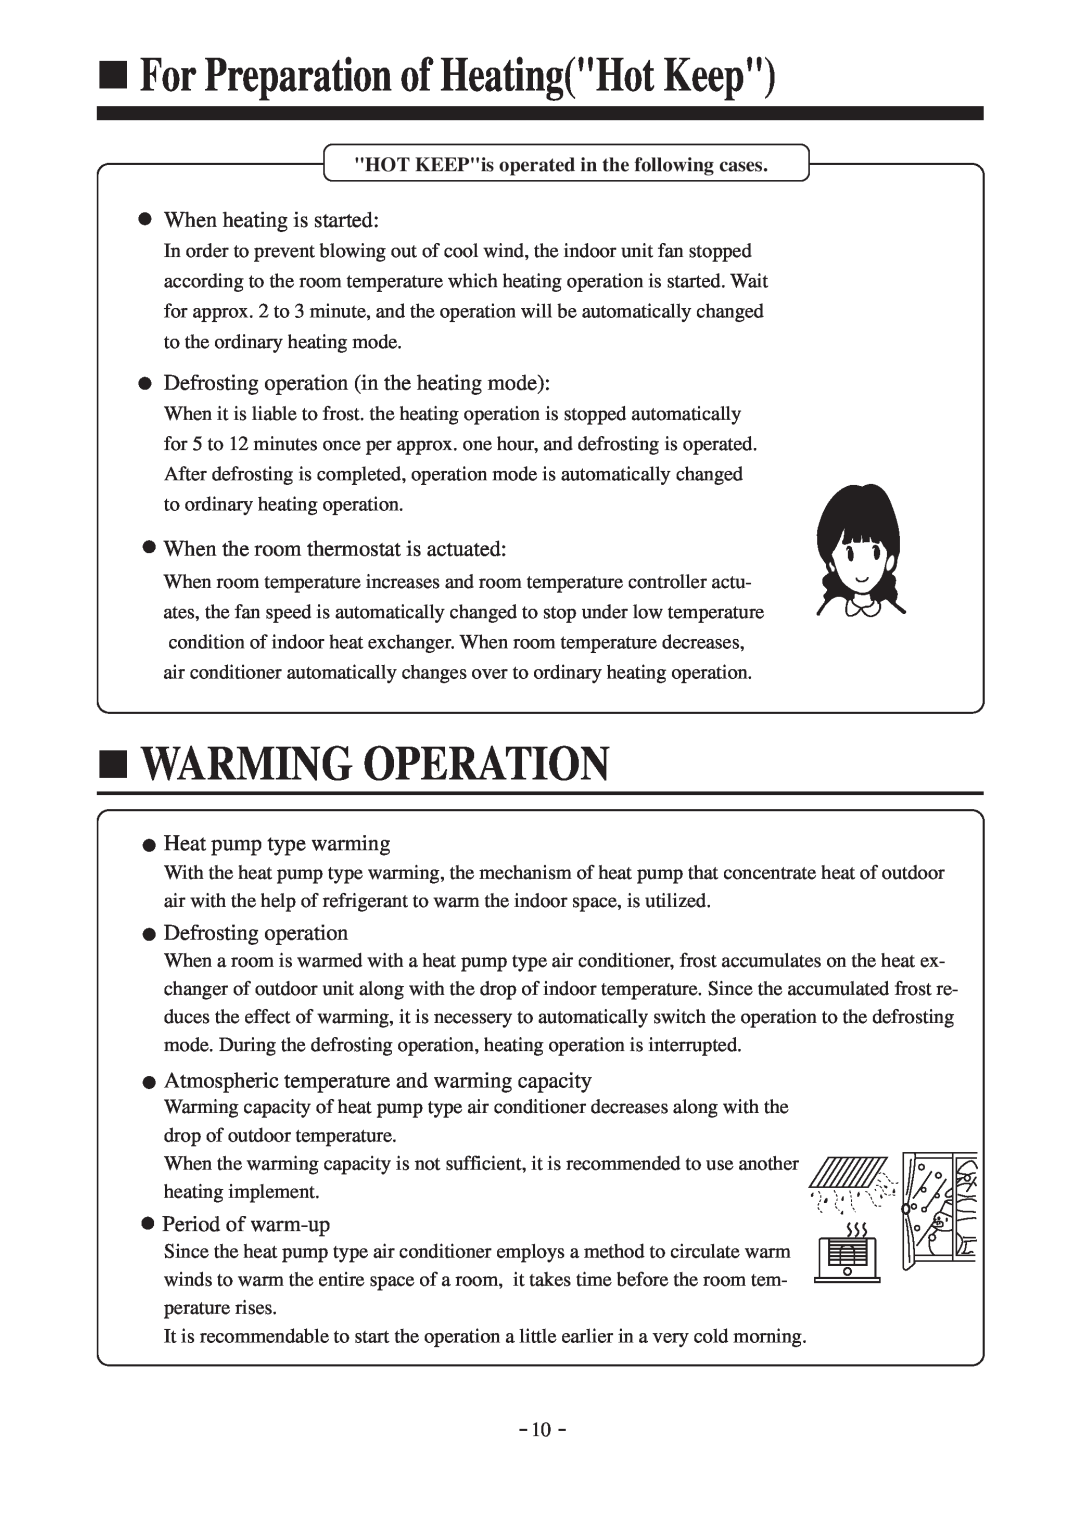 Haier AD36NAMBEA For Preparation of HeatingHot Keep, Warming Operation, When heating is started, Heat pump type warming 